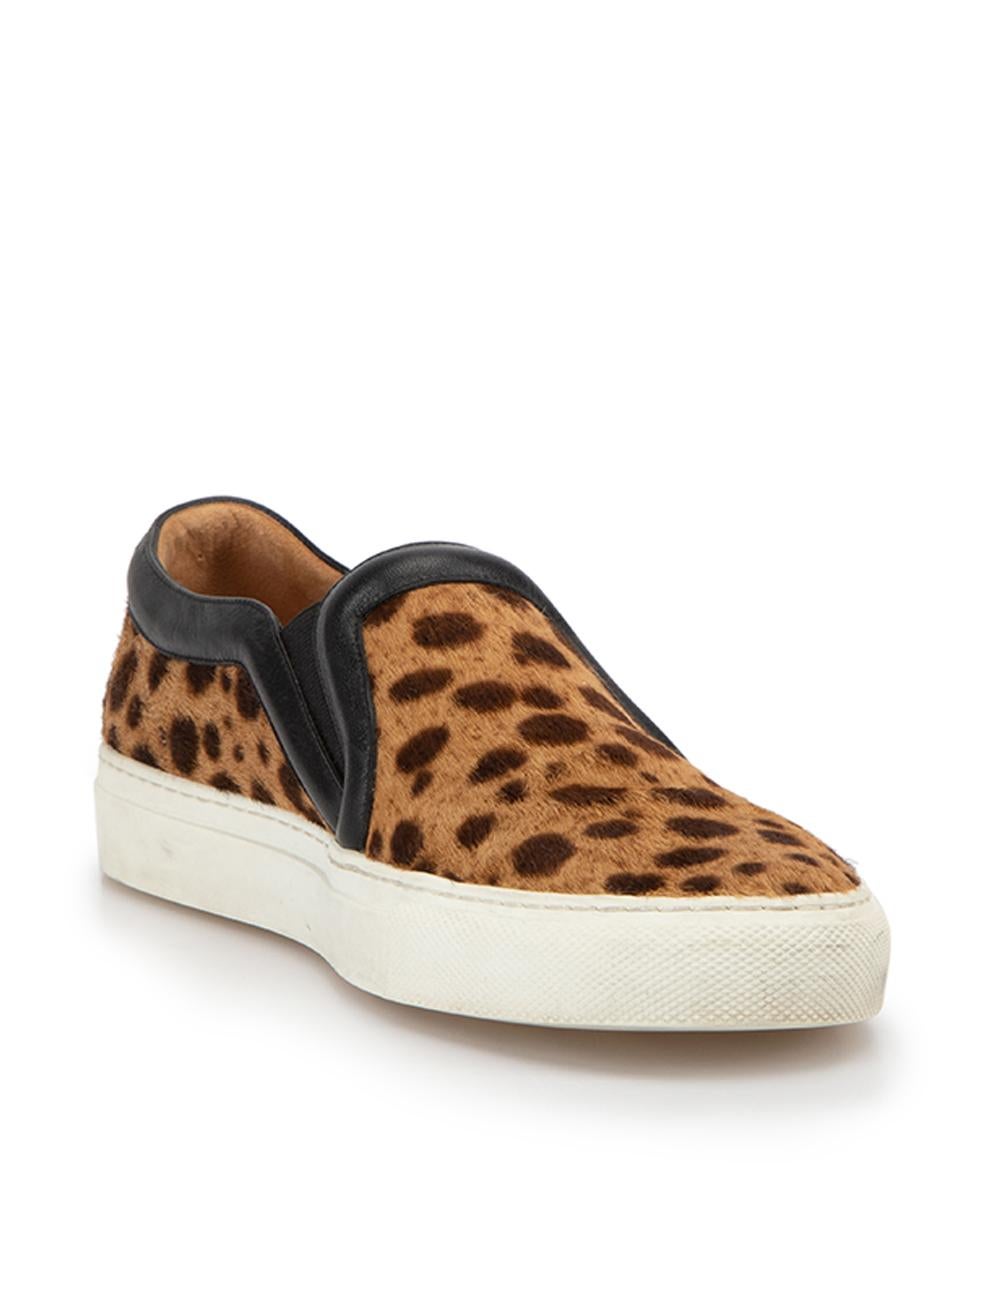 CONDITION is Good. Minor wear to trainers is evident. Light wear to rubber soles with light scuff marks on both on this used Givenchy designer resale item.
 
 Details
  Brown
 Pony hair calfskin
 Slip on trainers
 Animal print pattern
 Round toe
